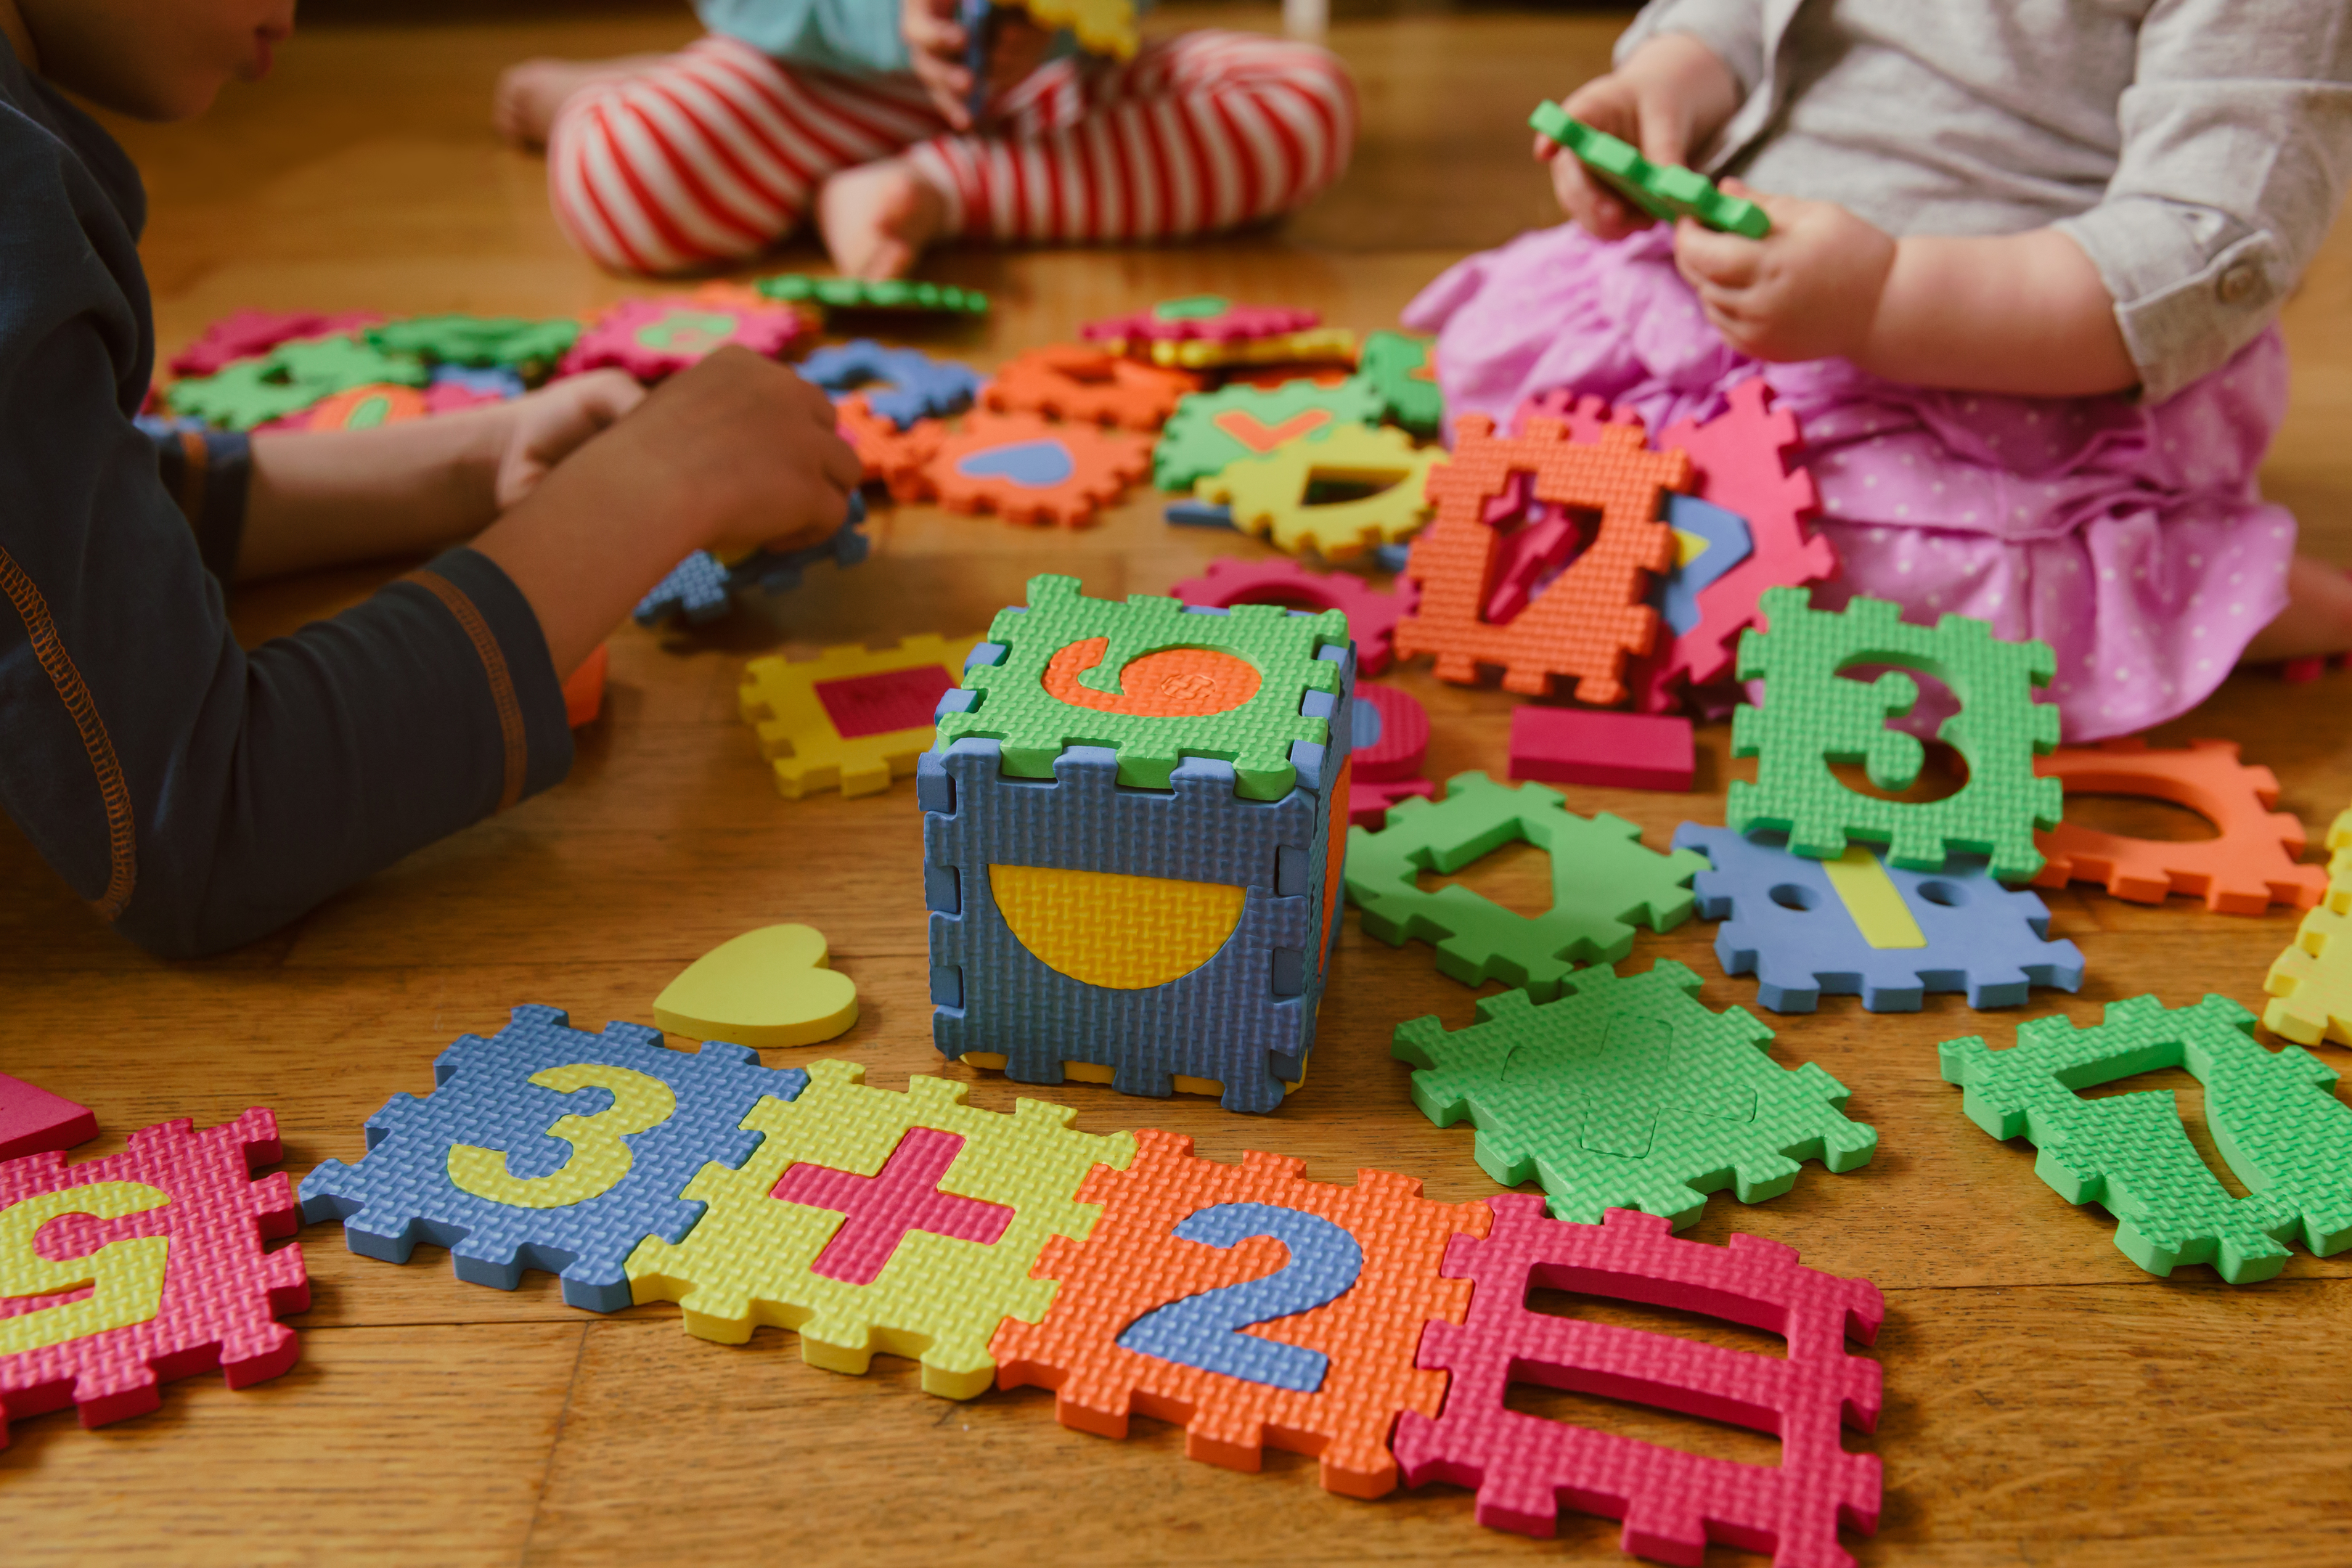 Scottish Labour said the figures make a "mockery" of the Scottish Government's plans for childcare (iStock)